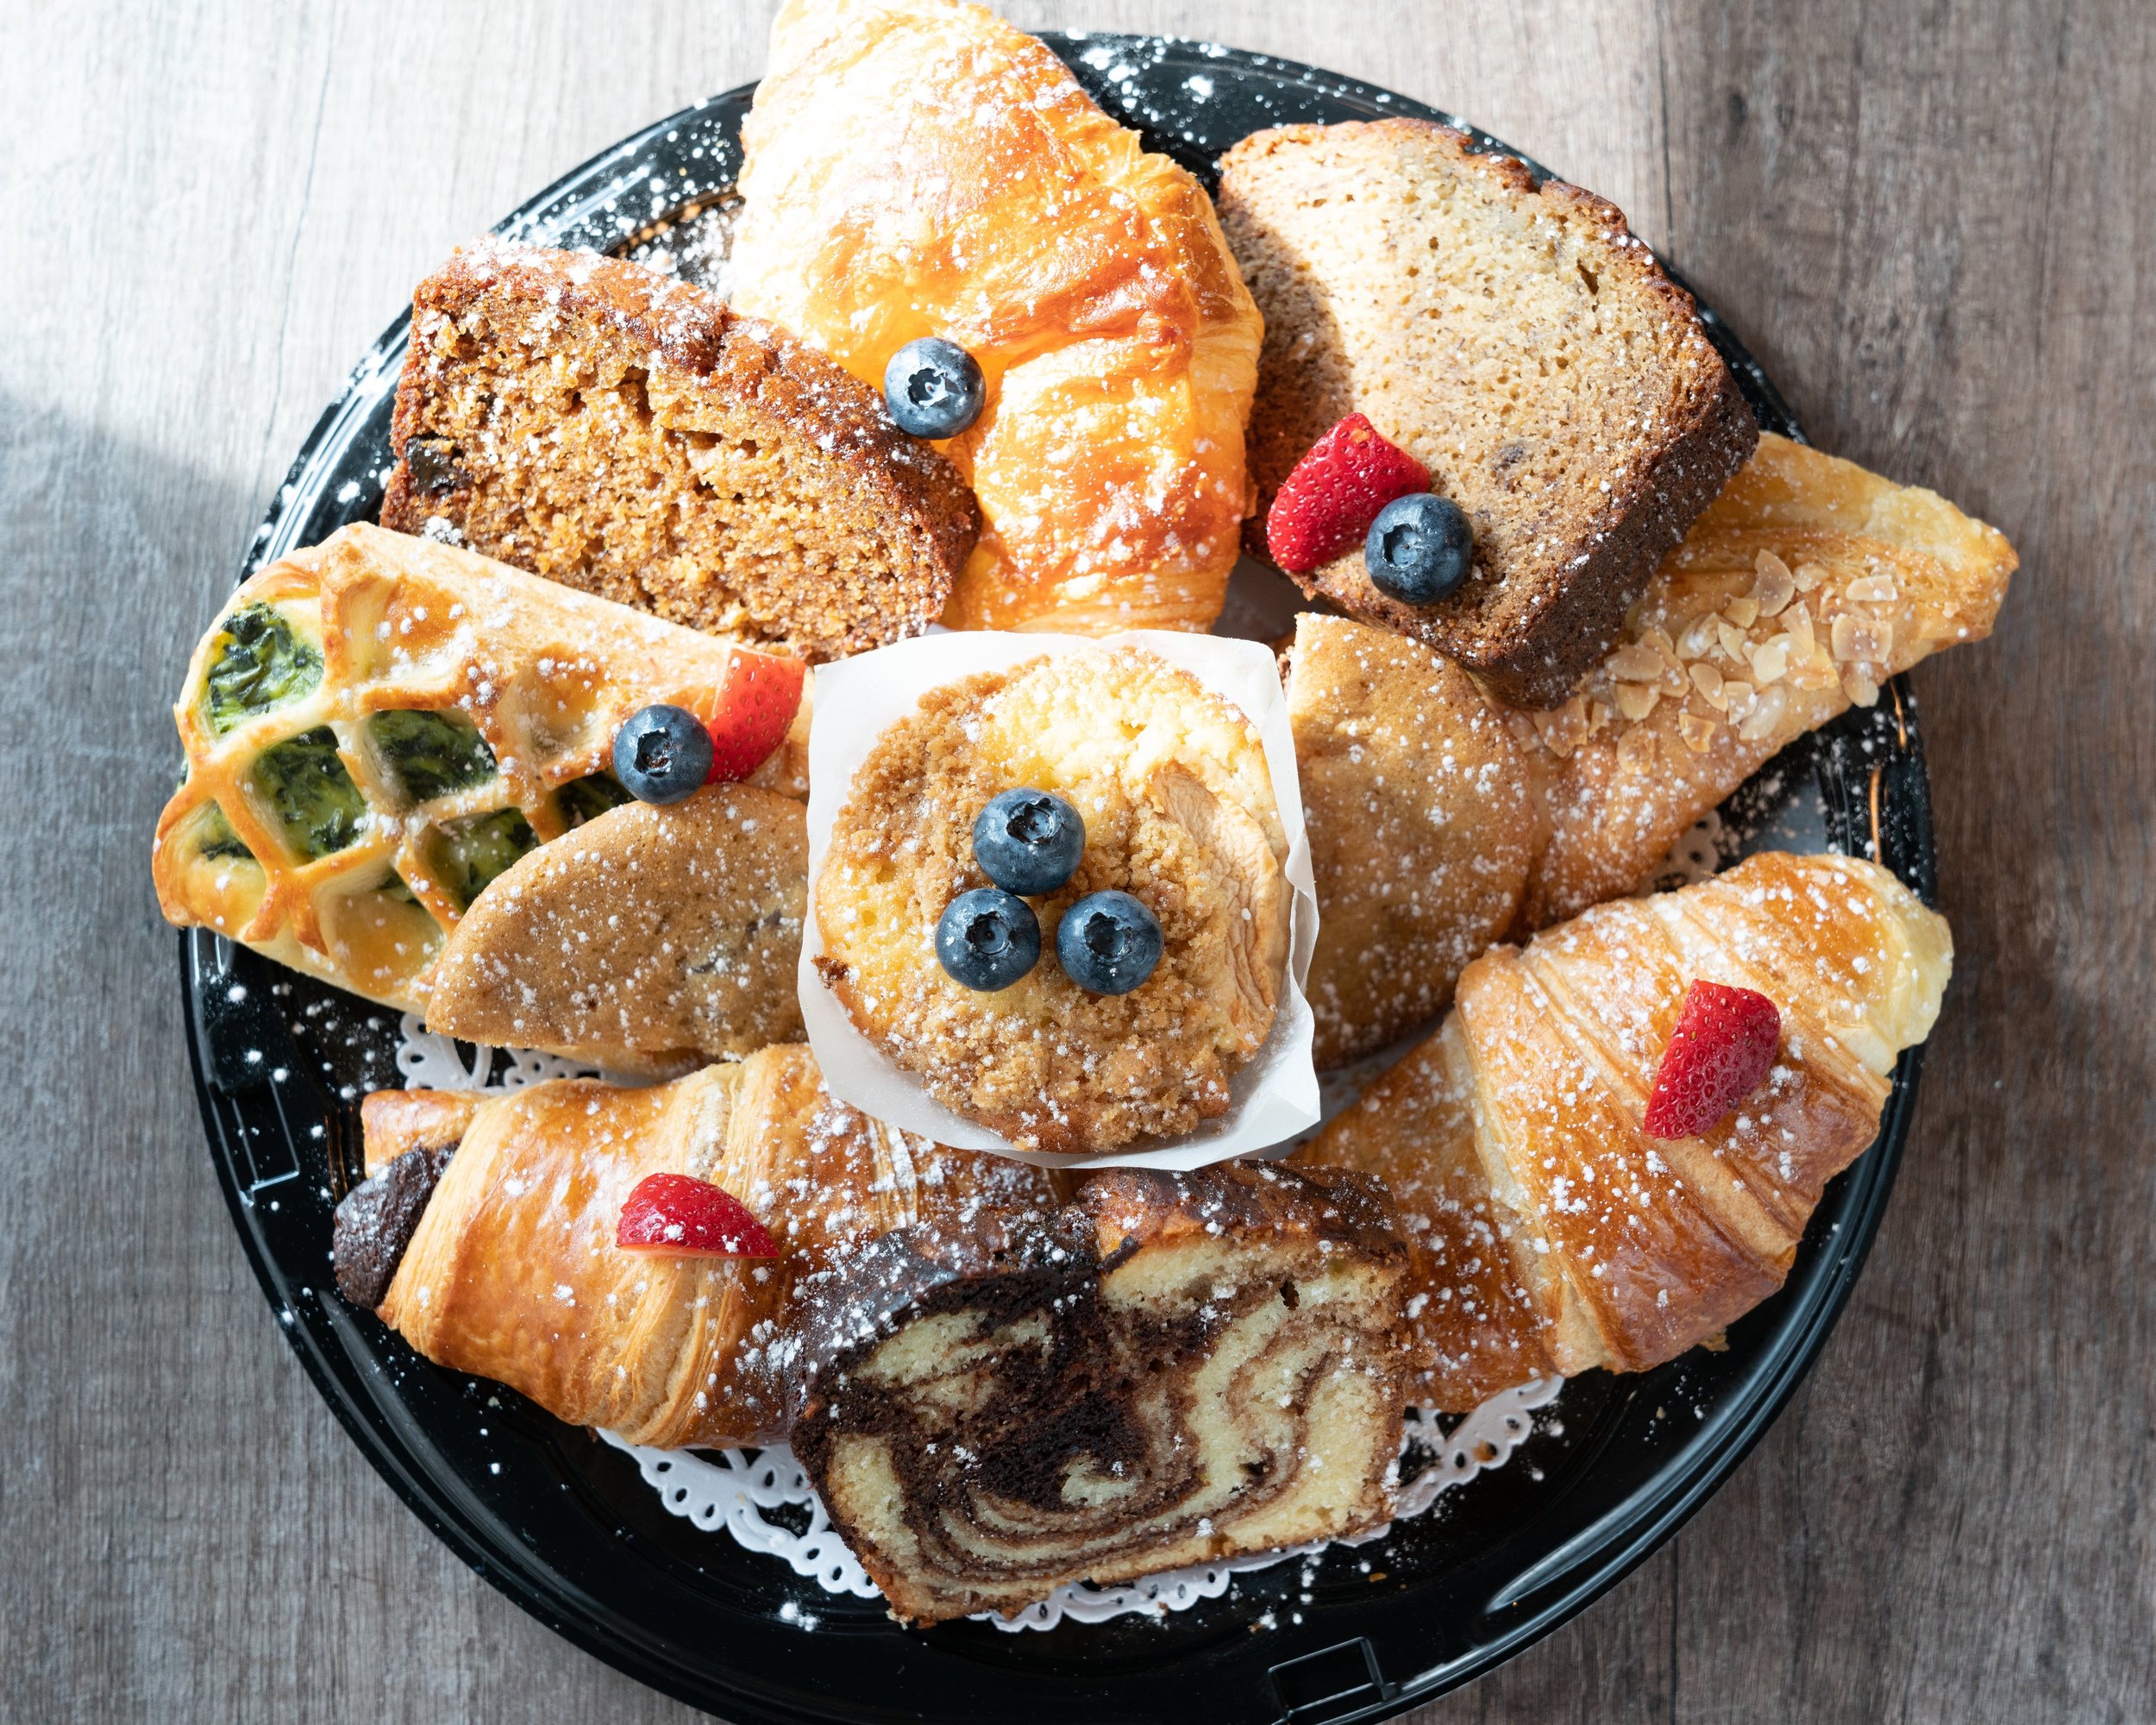 assorted-pastries_4460x4460.jpg